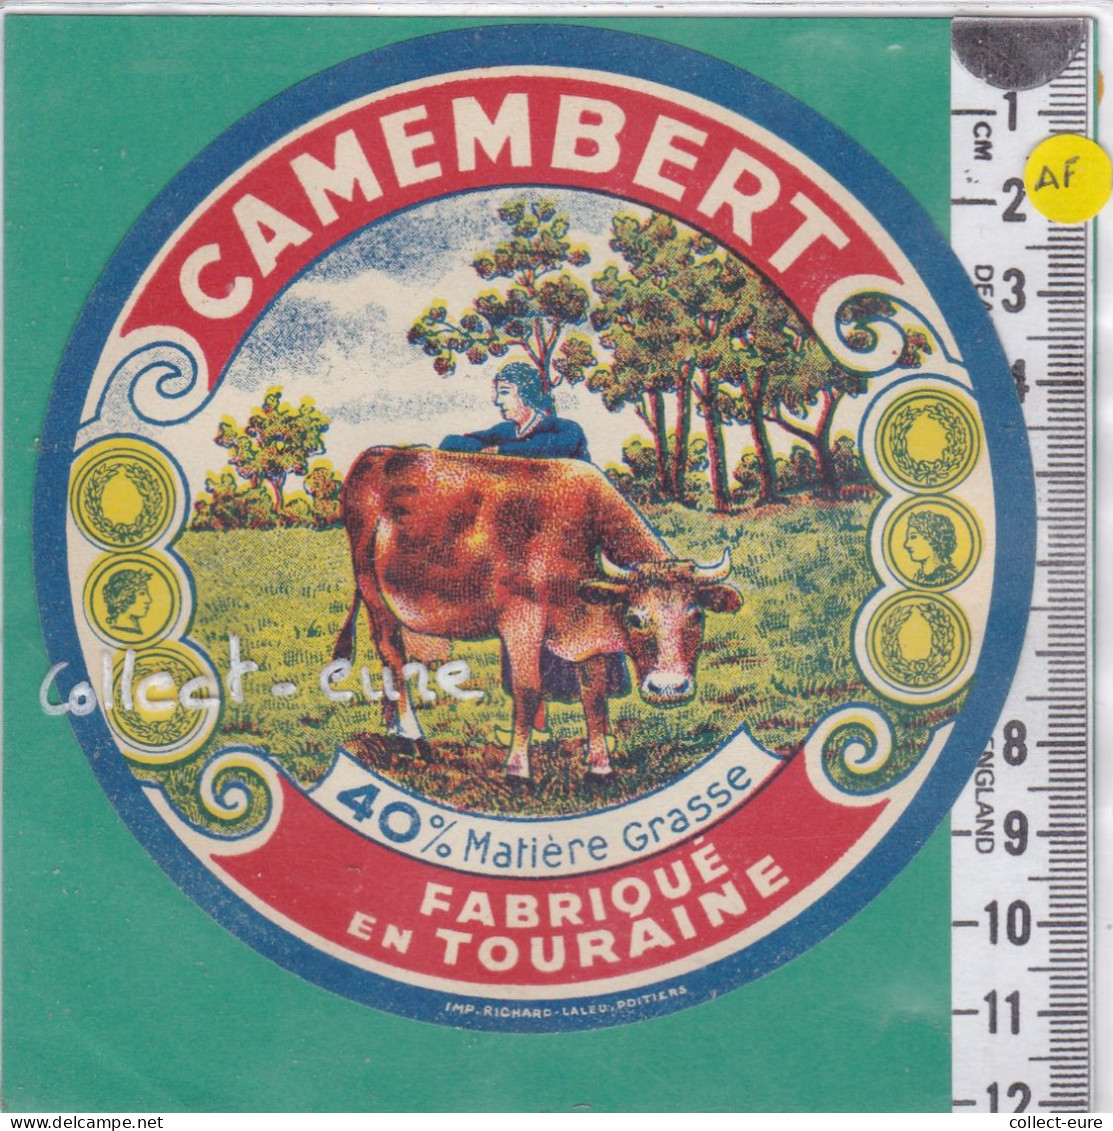 C1361 FROMAGE CAMEMBERT TOURAINE 40 % - Cheese